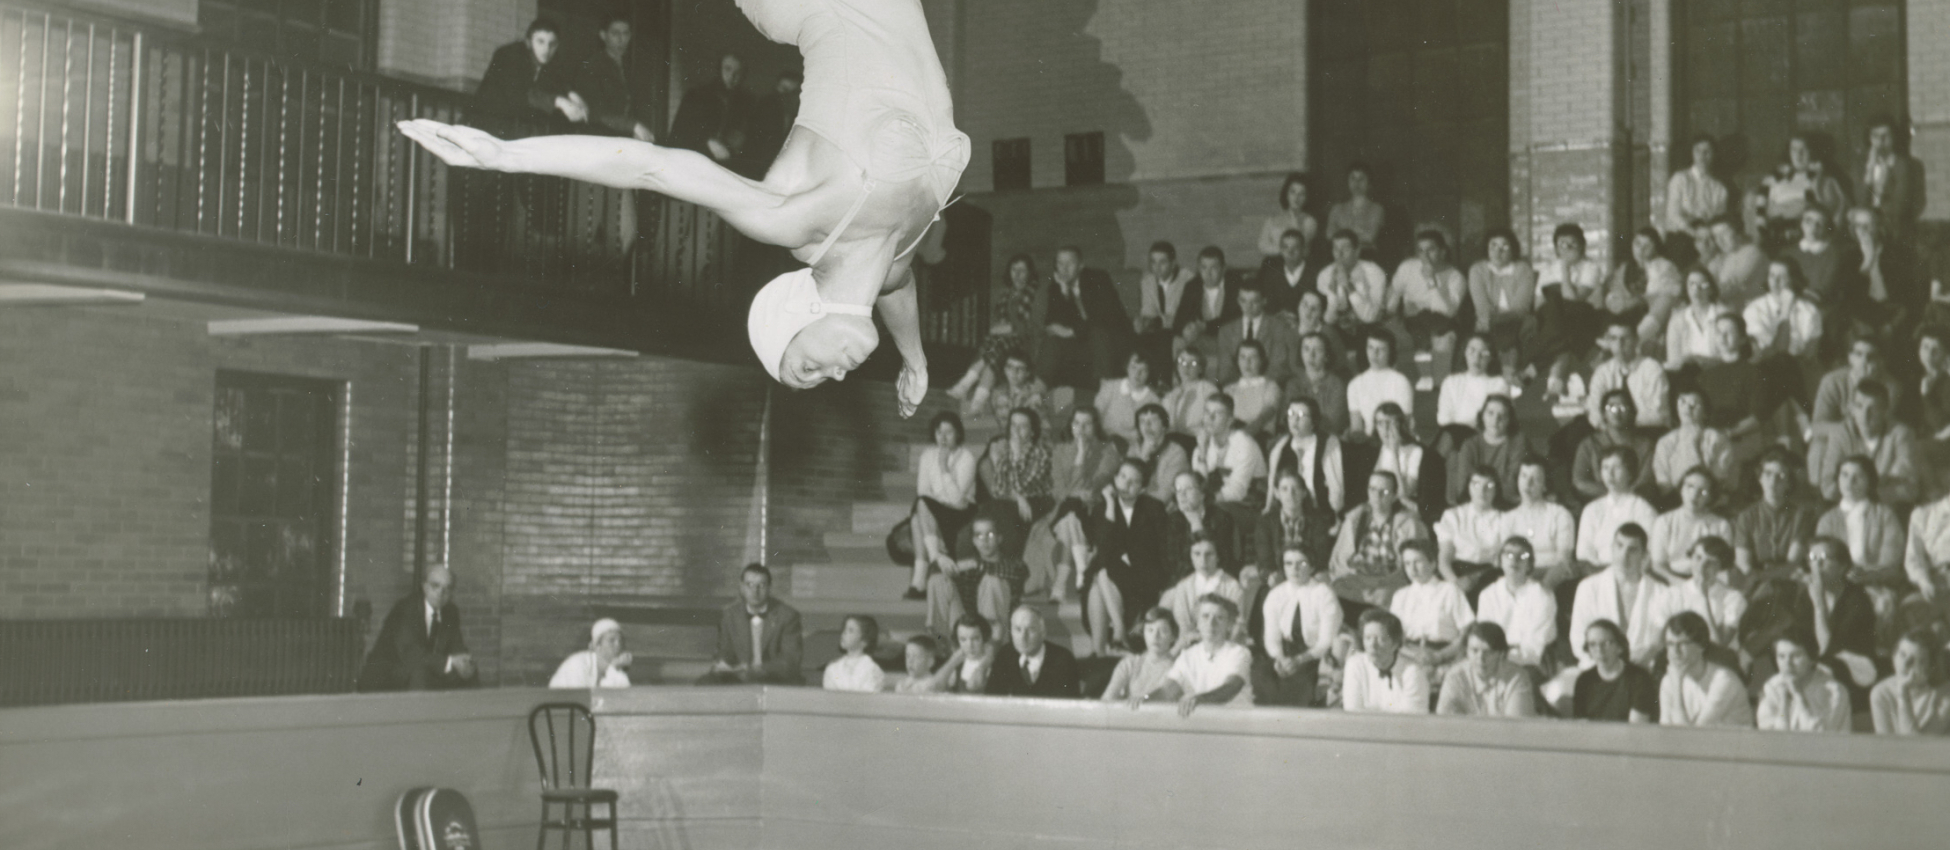 Old black and white photo of a woman diving into a pool at U of R